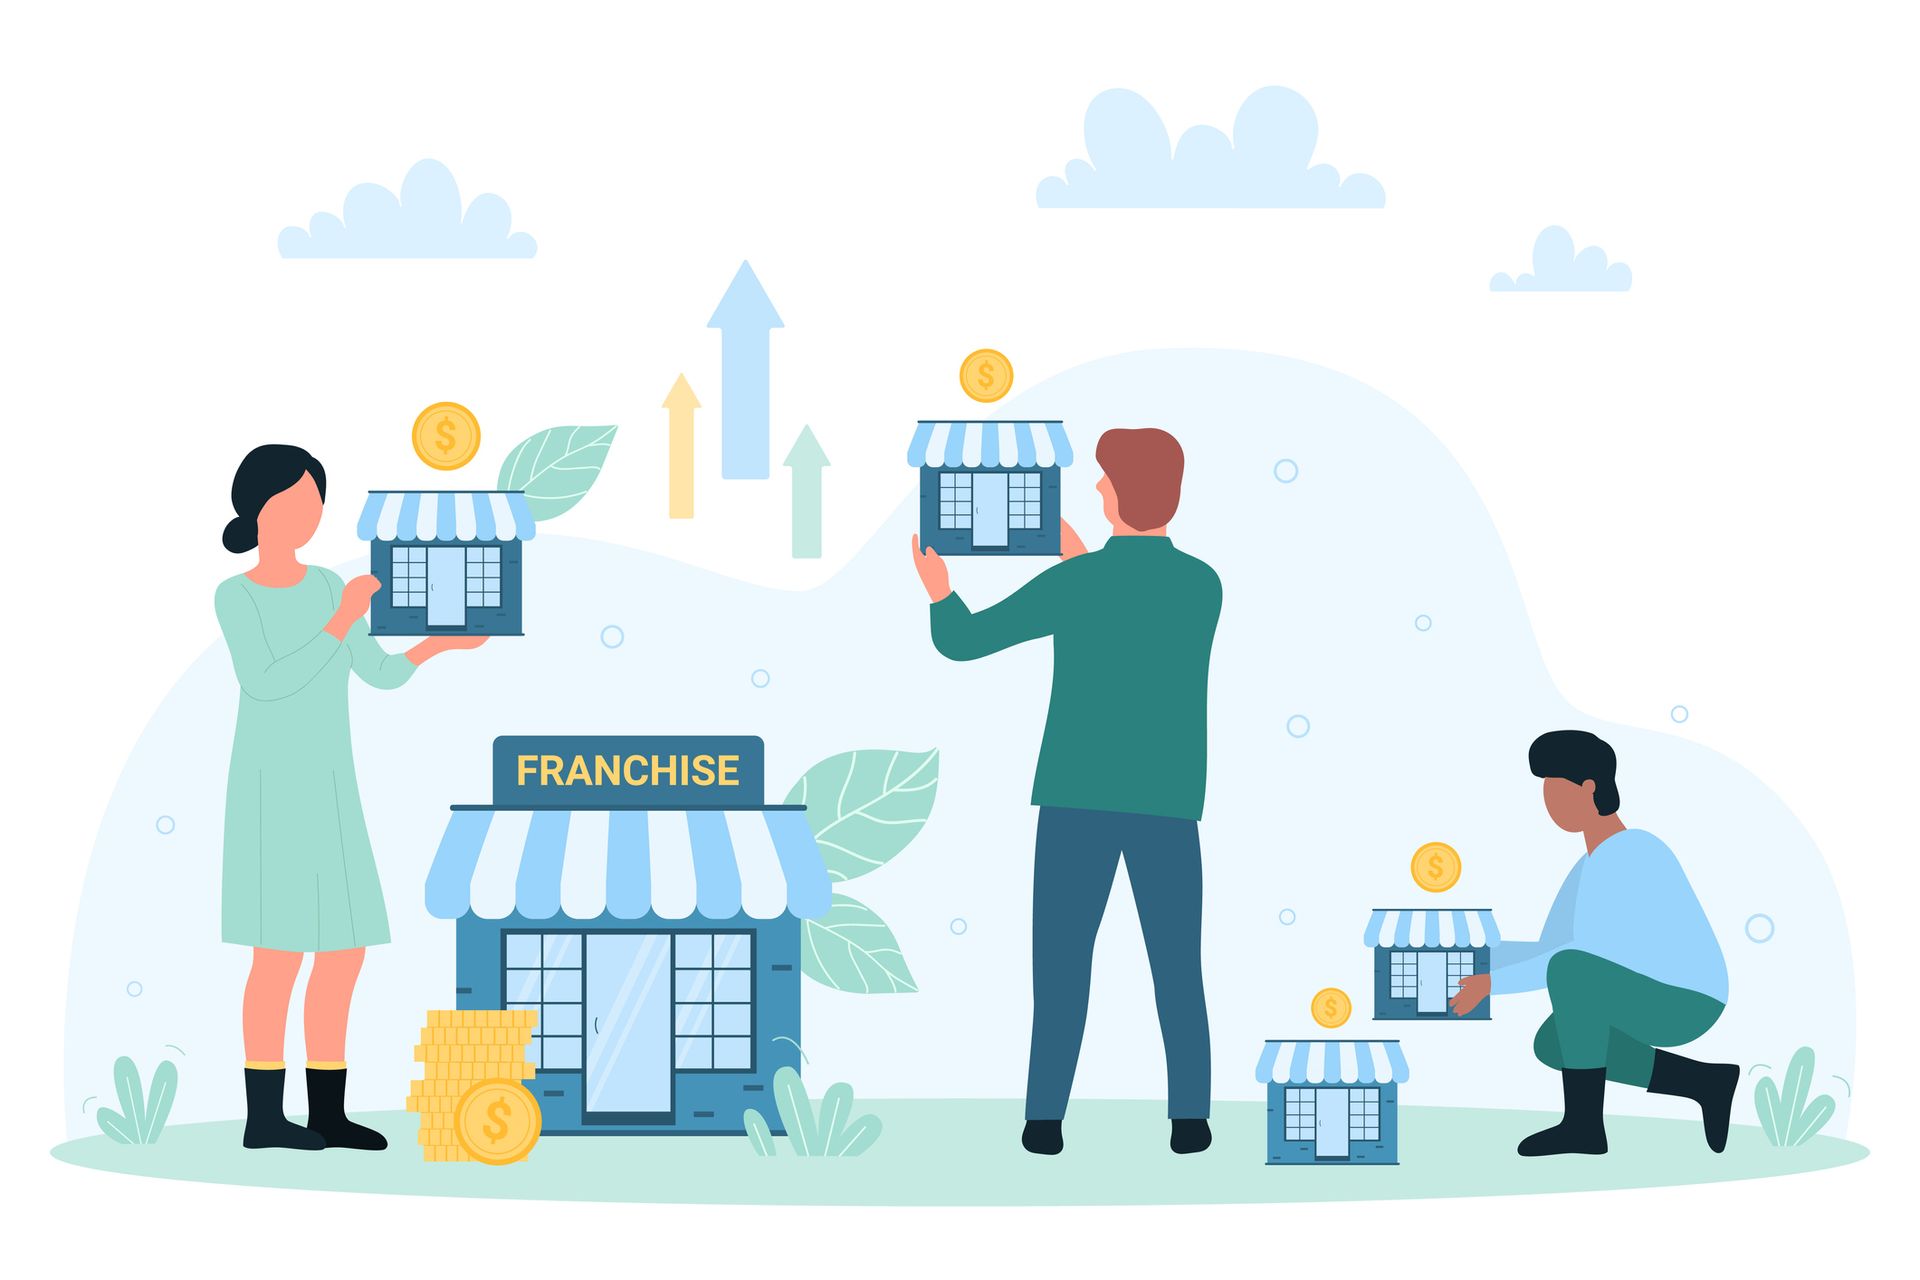 Infographic for Franchise Genesis representing the growth opportunities of franchising.